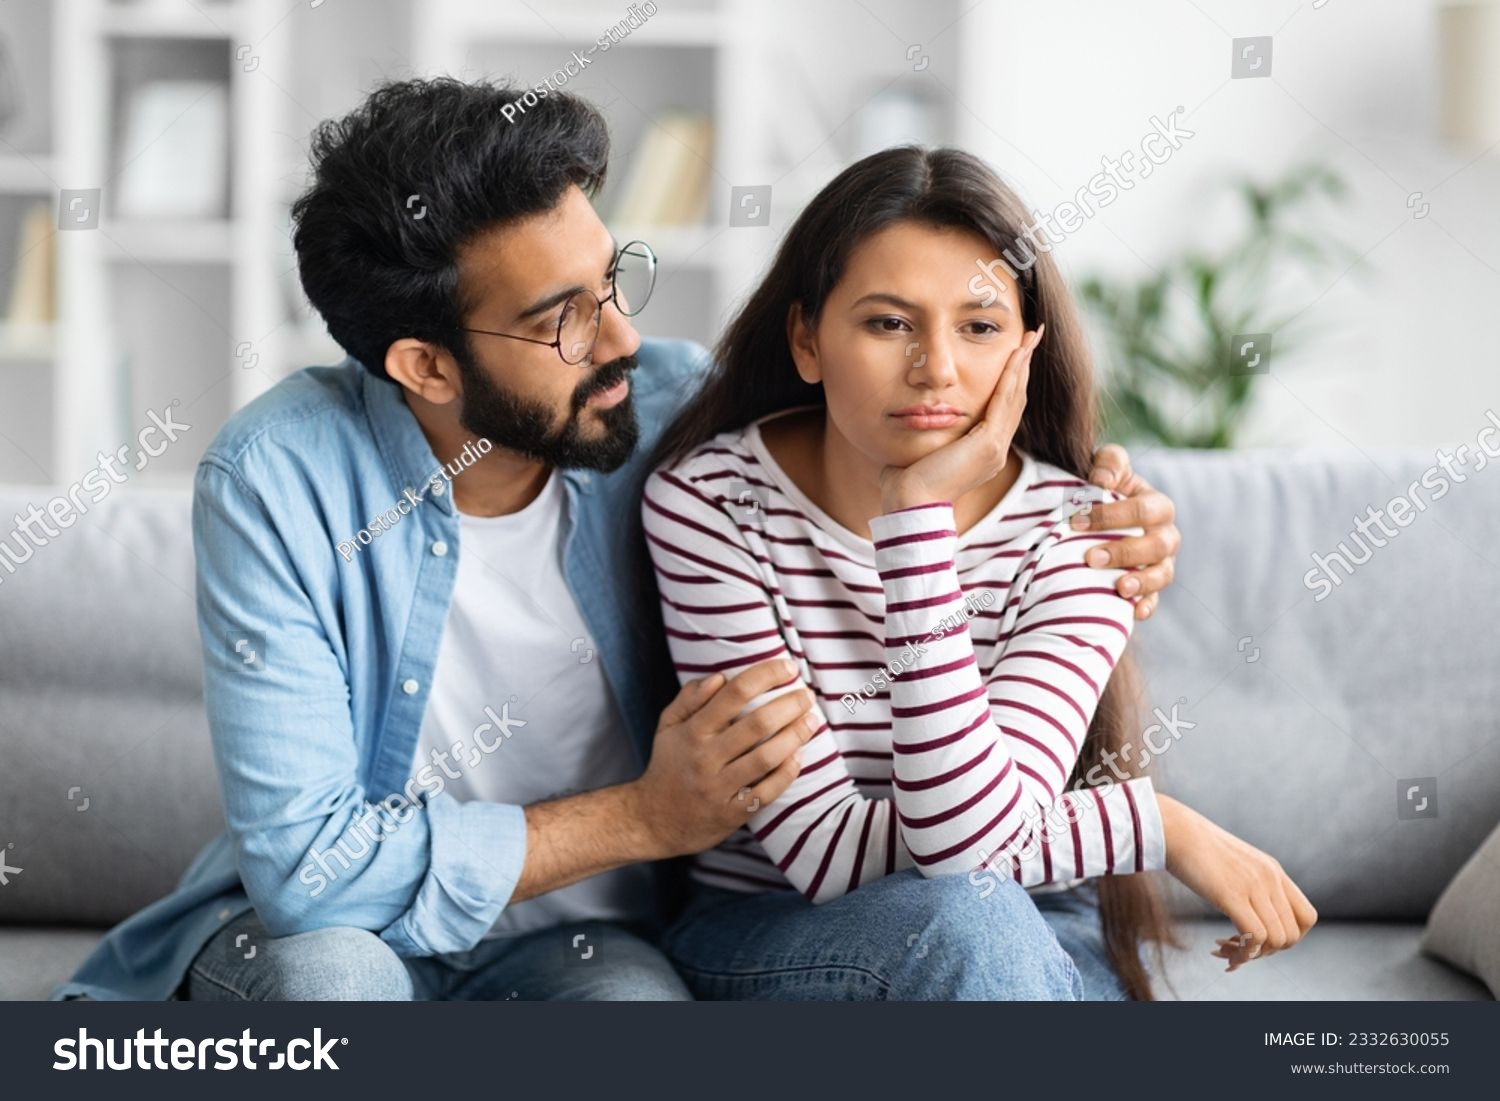 Compassionate eastern husband giving comfort, support to upset wife, holding shoulders, speaking expressing empathy. Man feeling guilty, asking girlfriend to forgive. Relationship, compassion concept #2332630055